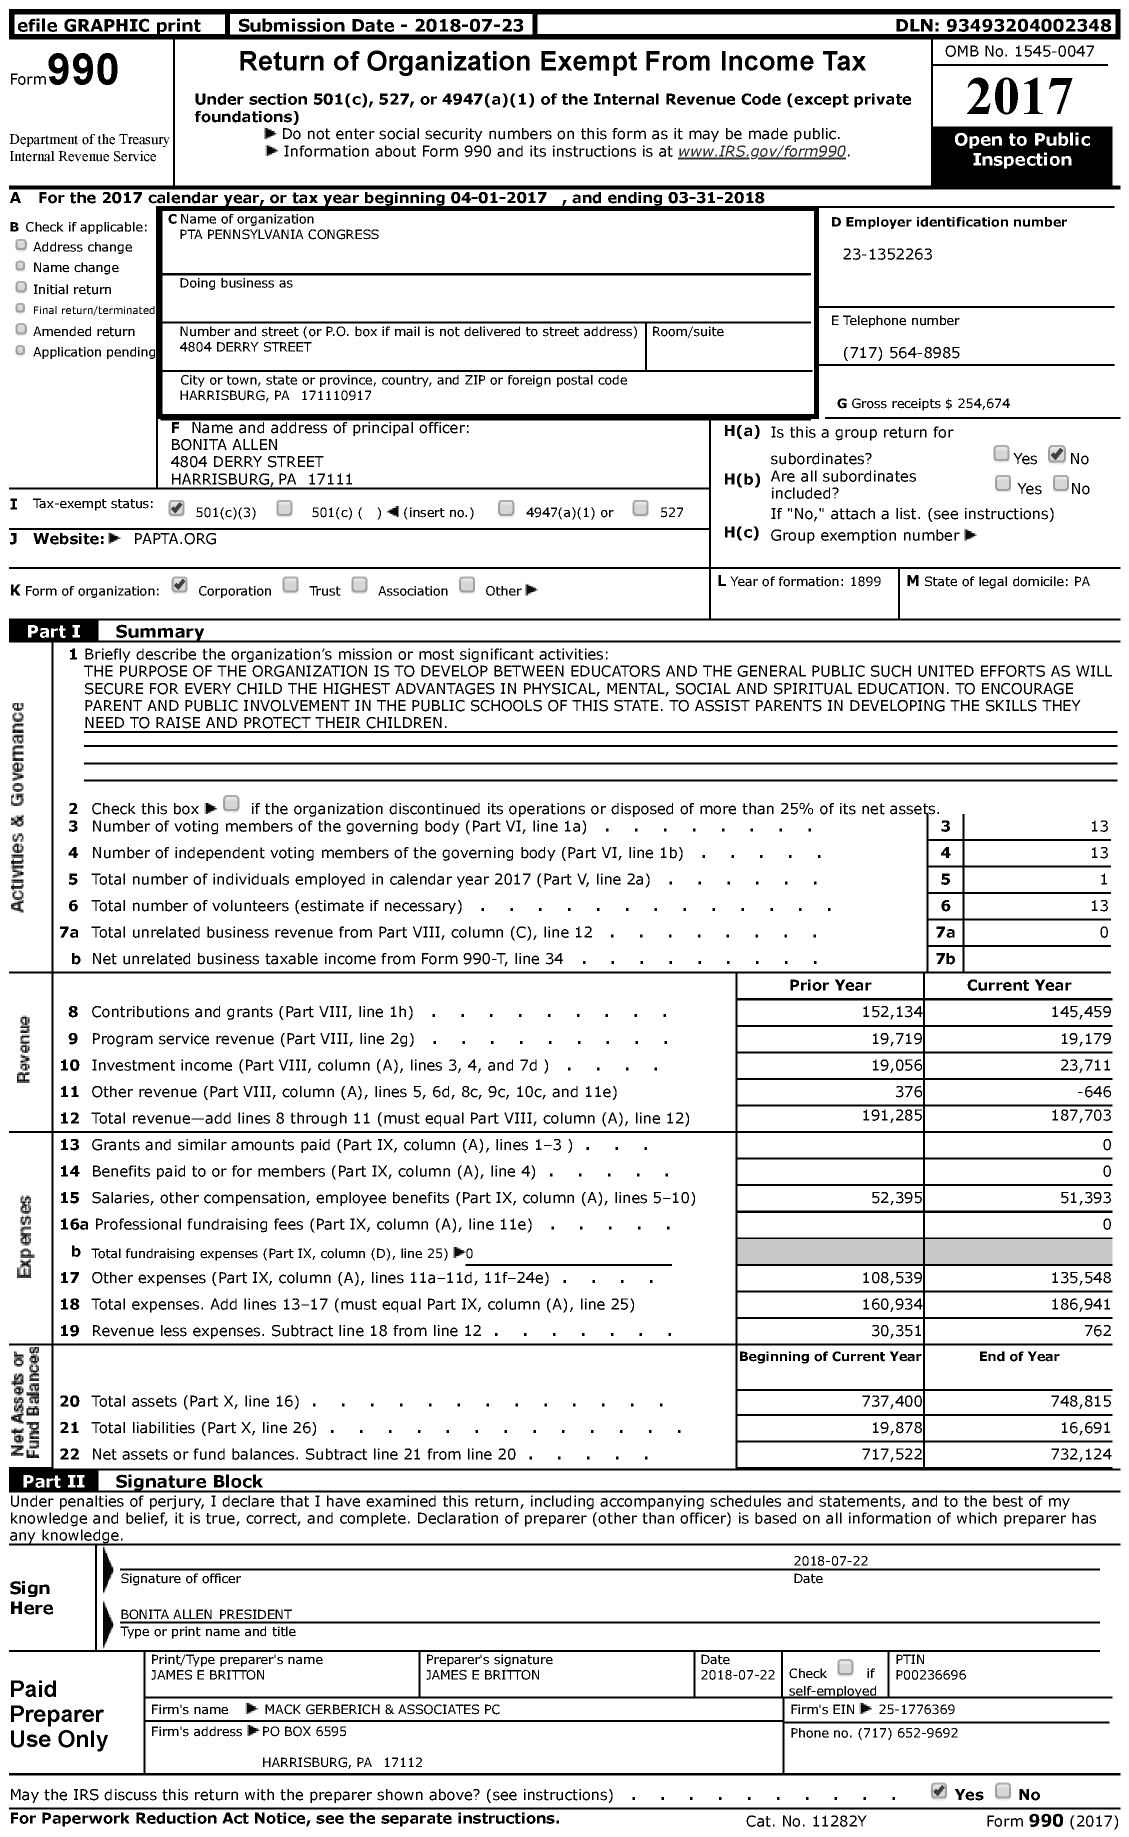 Image of first page of 2017 Form 990 for PTA Pennsylvania Congress